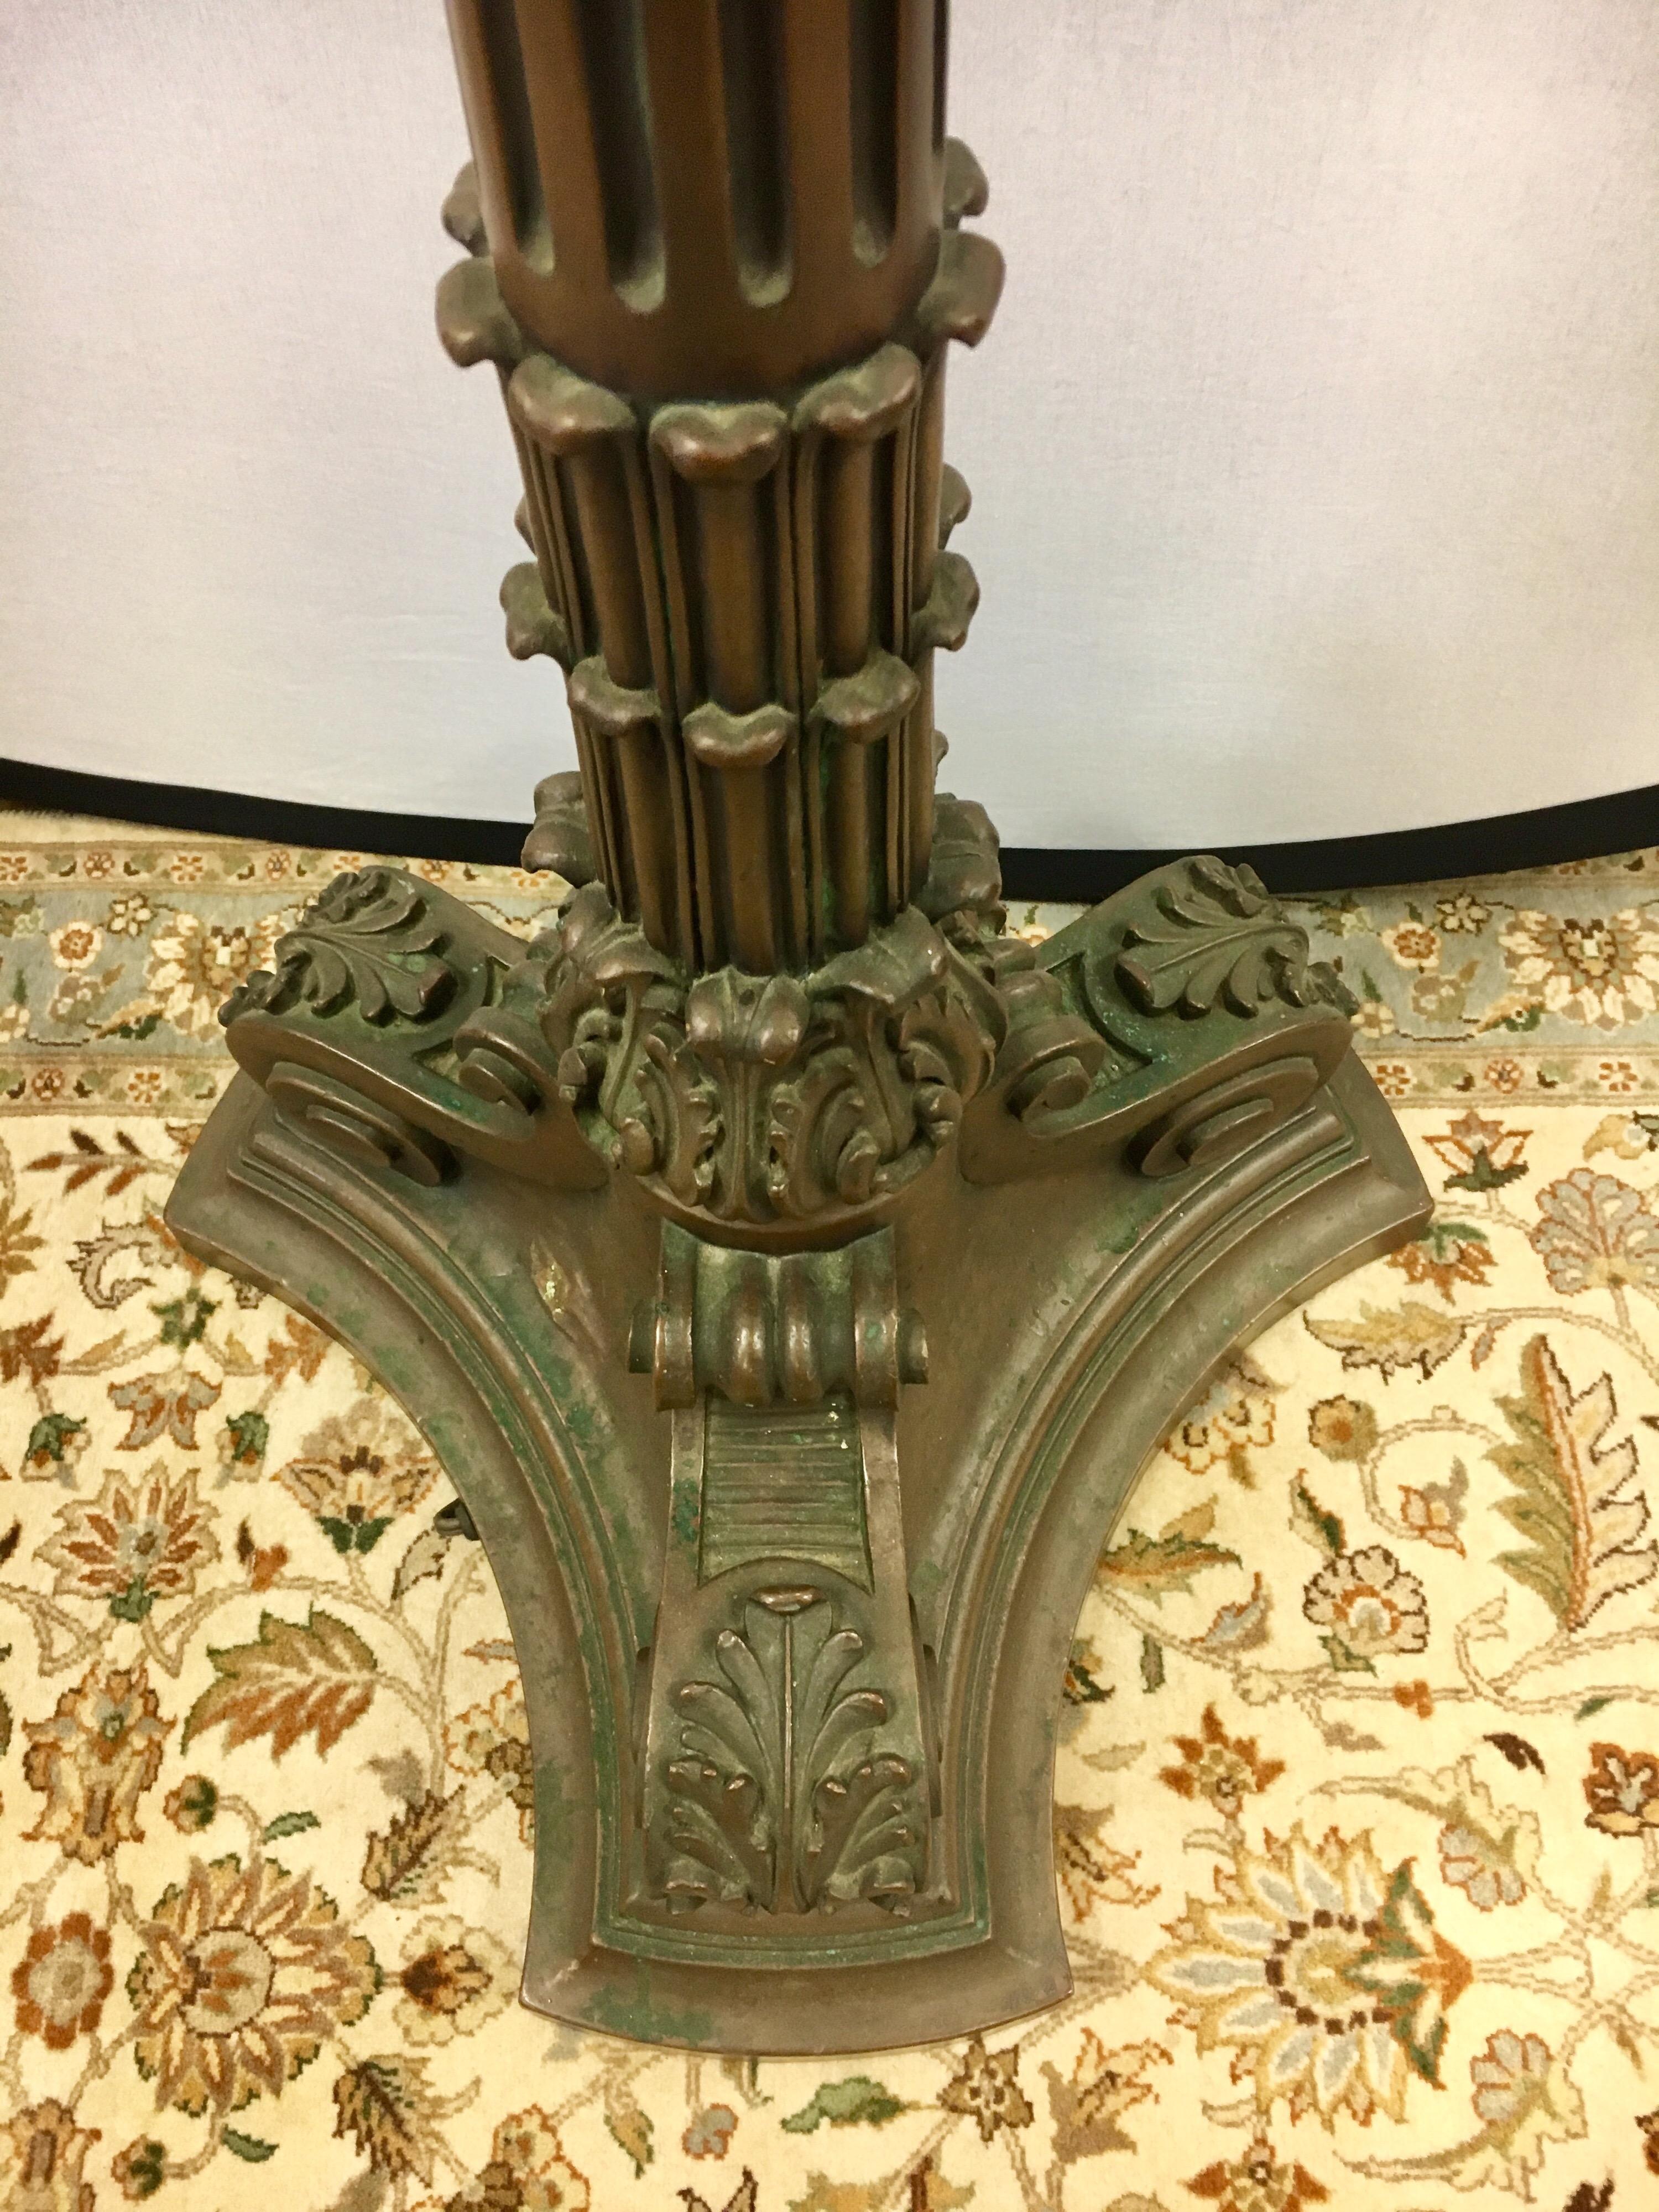 Early 20th Century Neoclassical Bronze Candelabra Floor Lamp Torchiere Chandelier Style